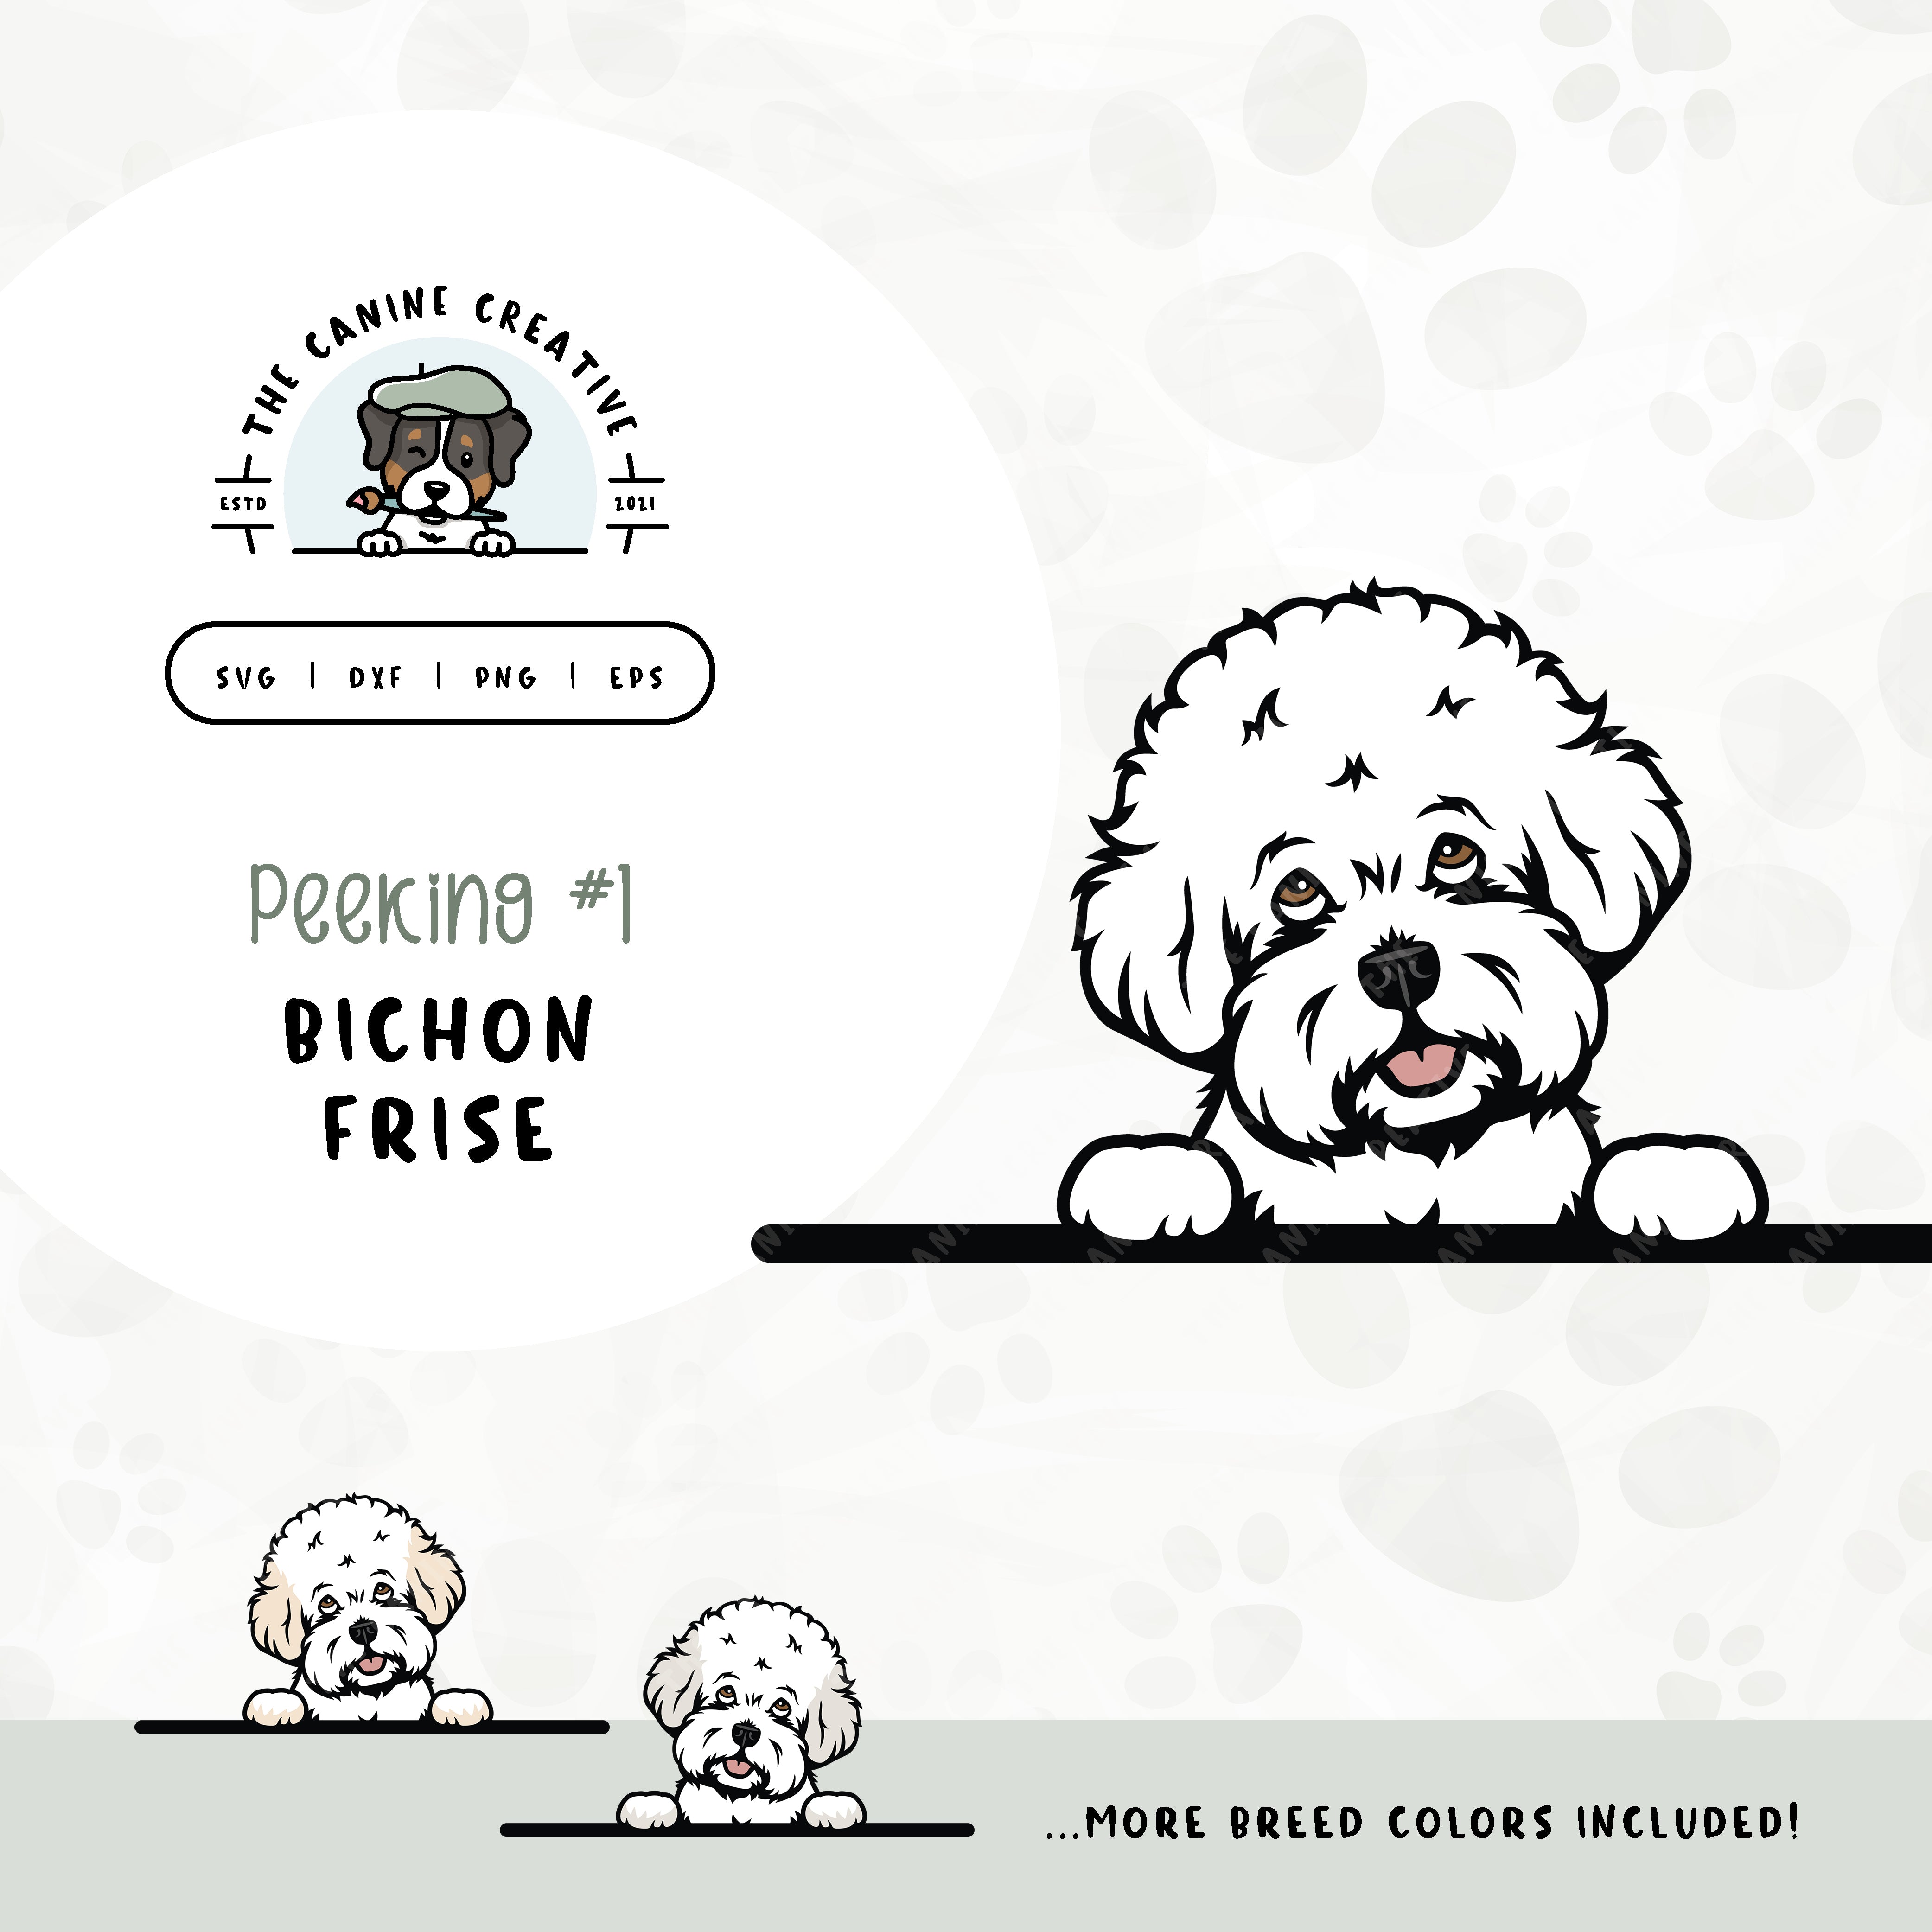 This illustrated design features a peeking Bichon Frise. File formats include: SVG, DXF, PNG, and EPS.